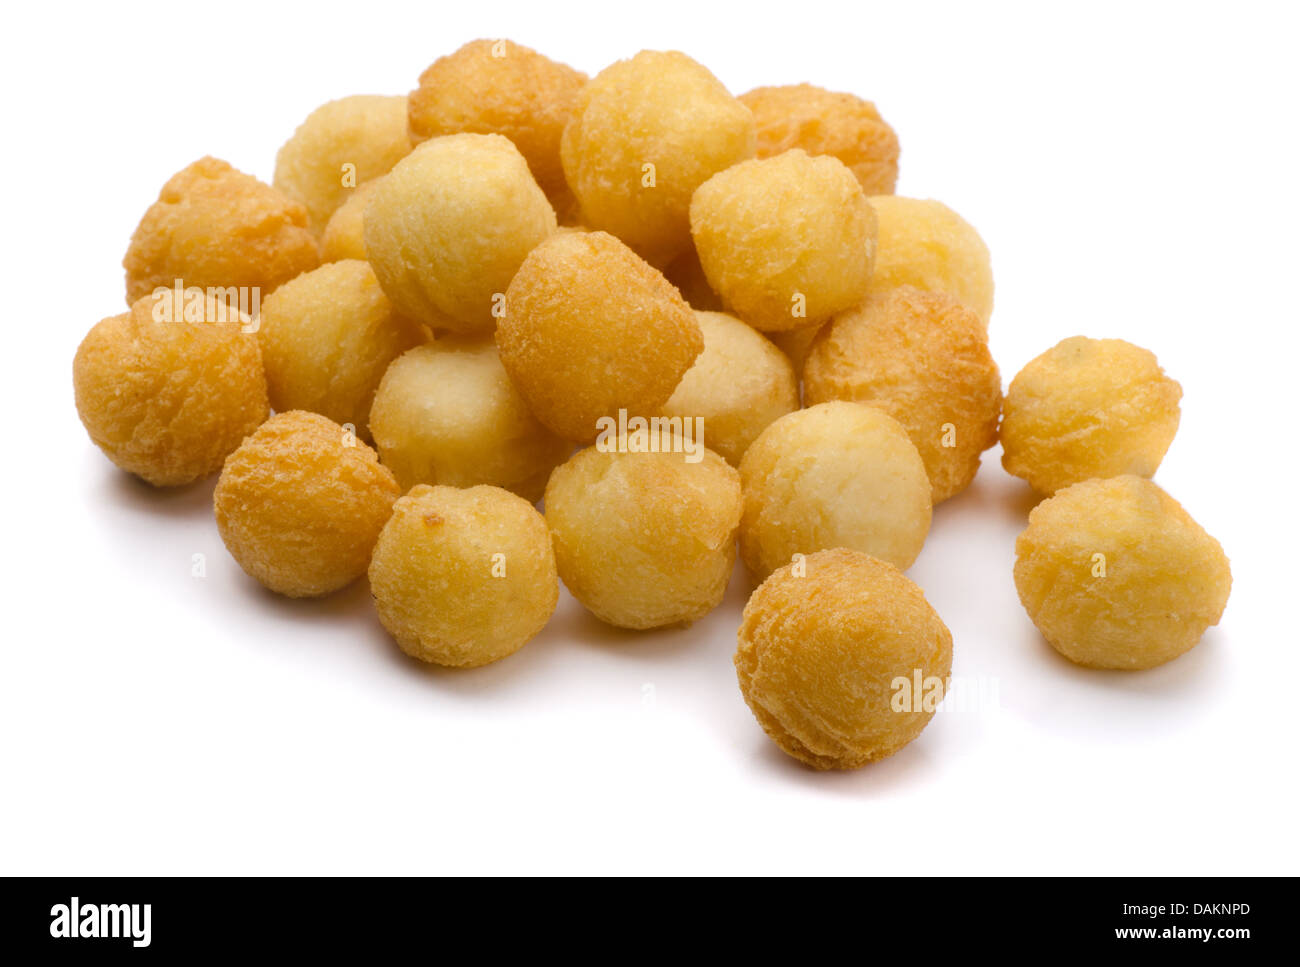 Fried mashed potato and cheese balls isolated on white Stock Photo